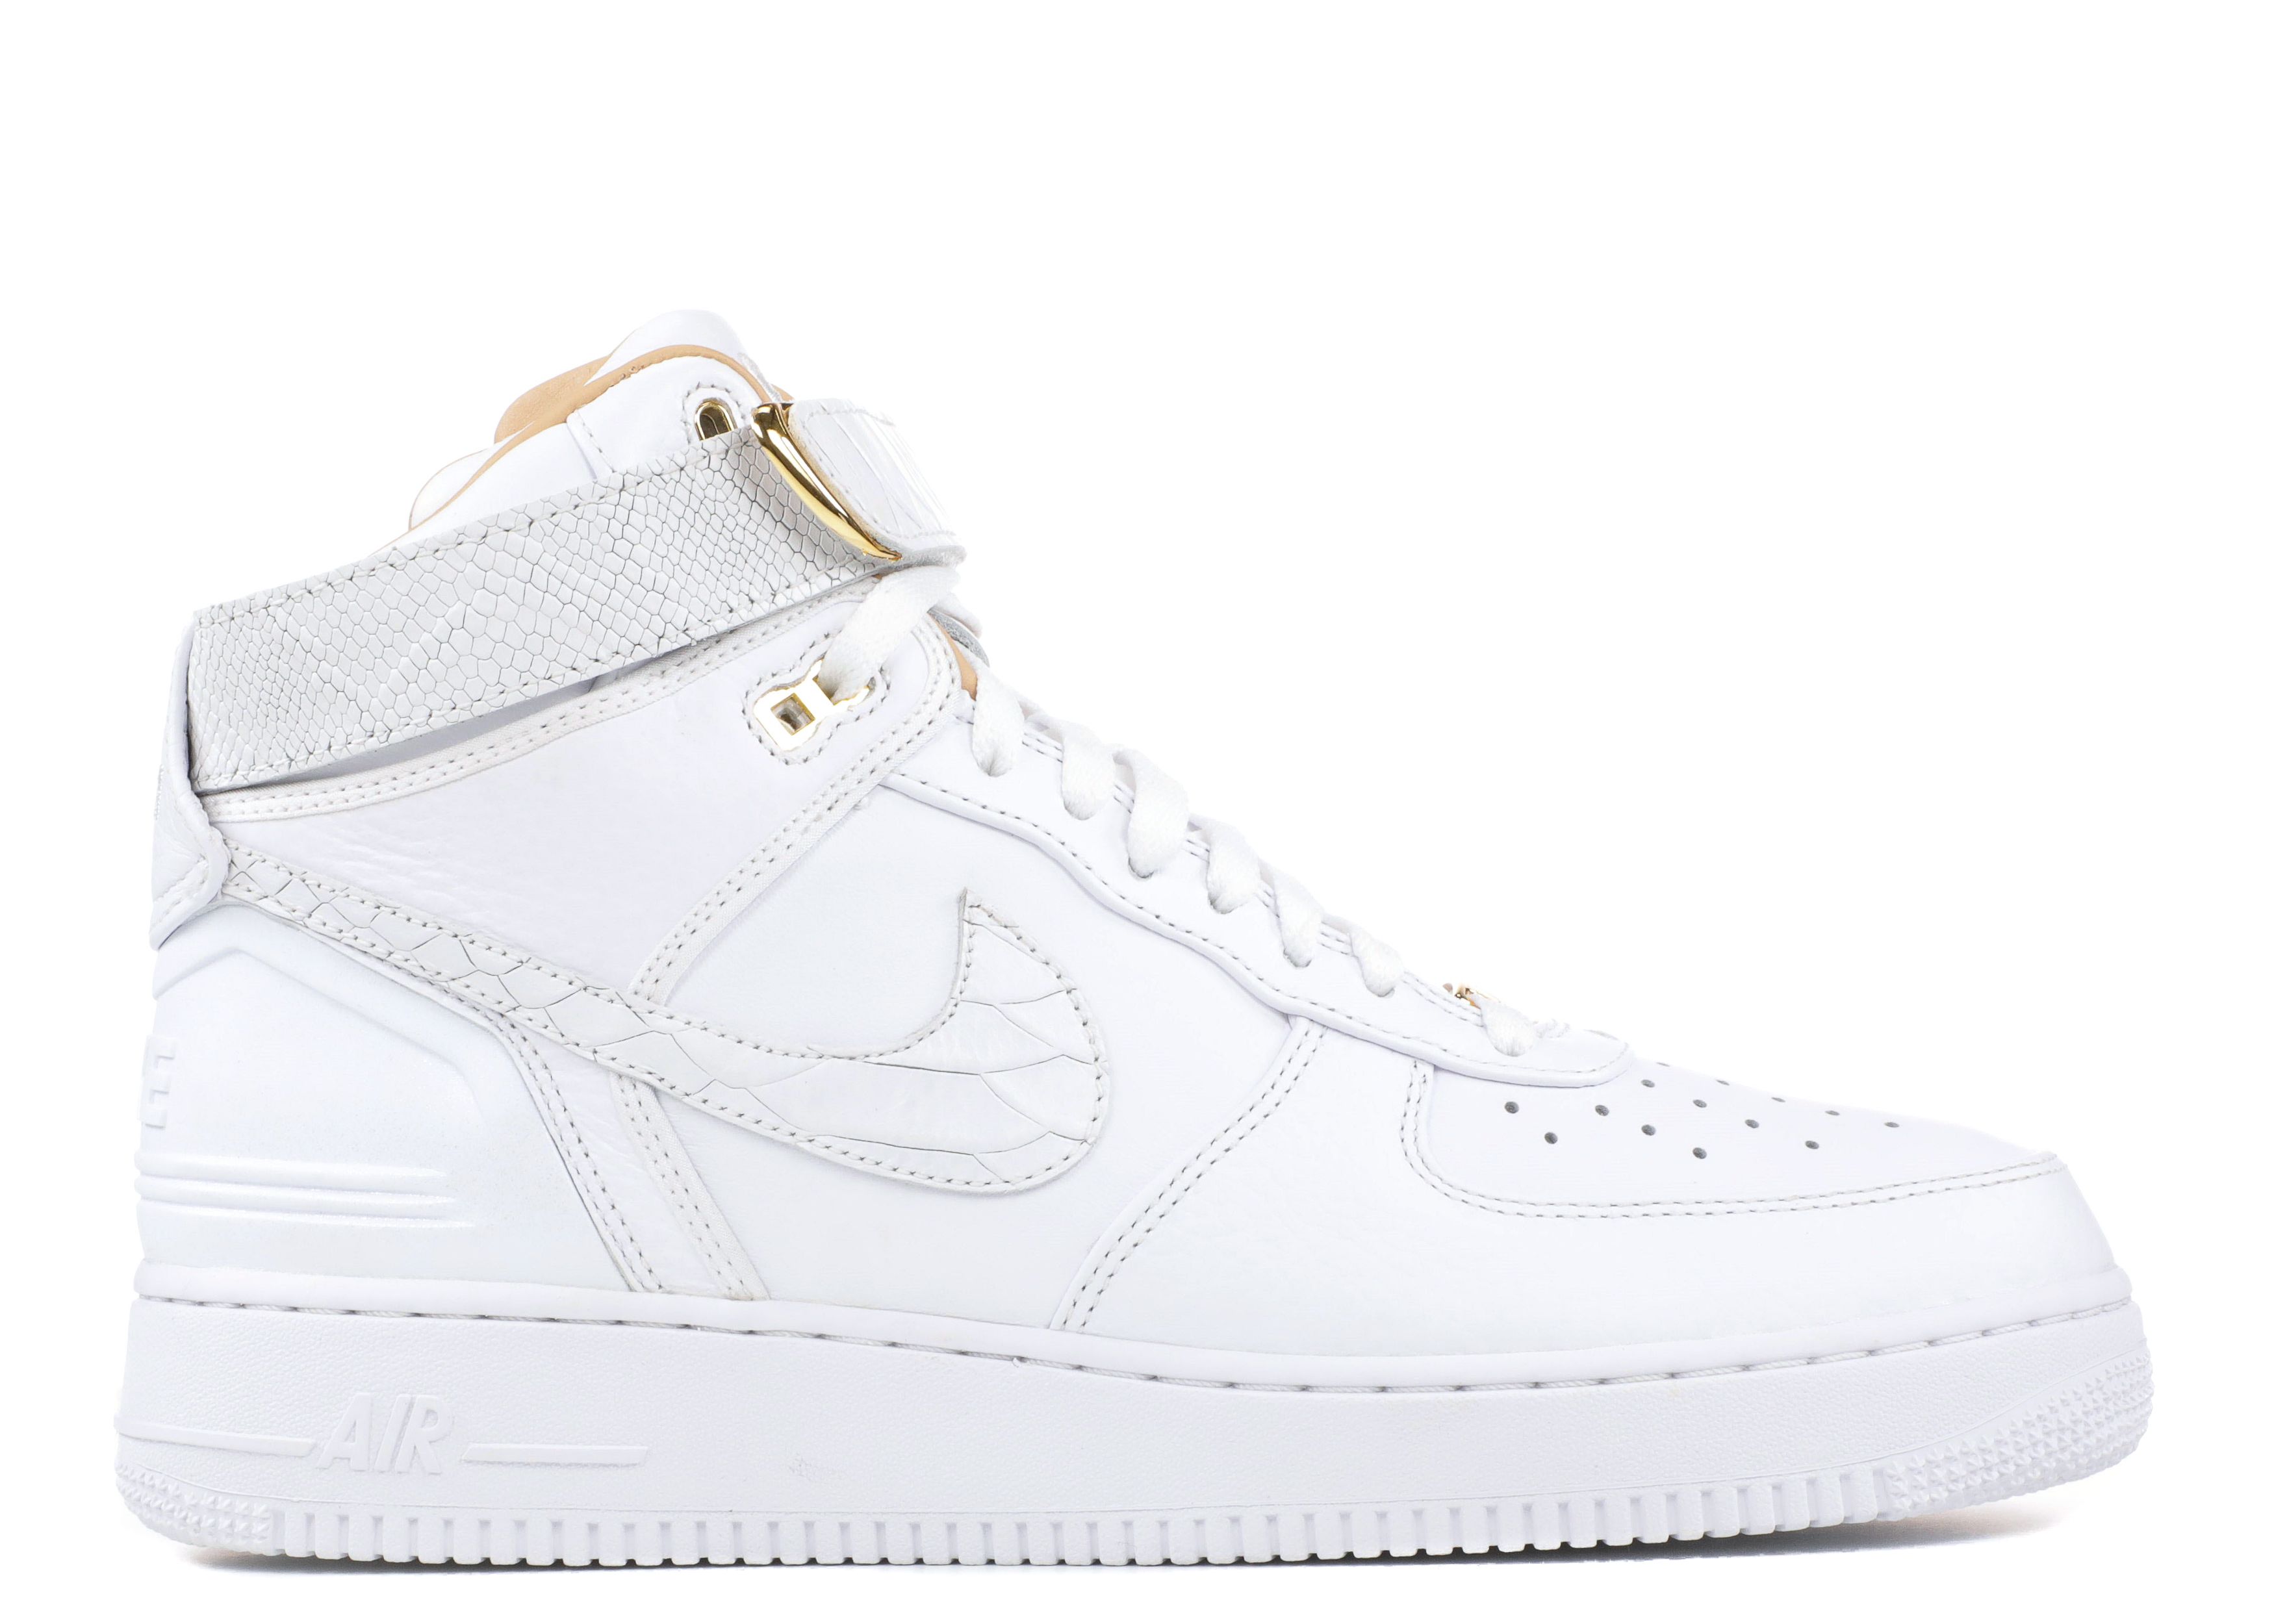 de ober frequentie Bedrijfsomschrijving Just Don X Air Force 1 High 'AF100' - Nike - AO1074 100 - white/white-white  | Flight Club